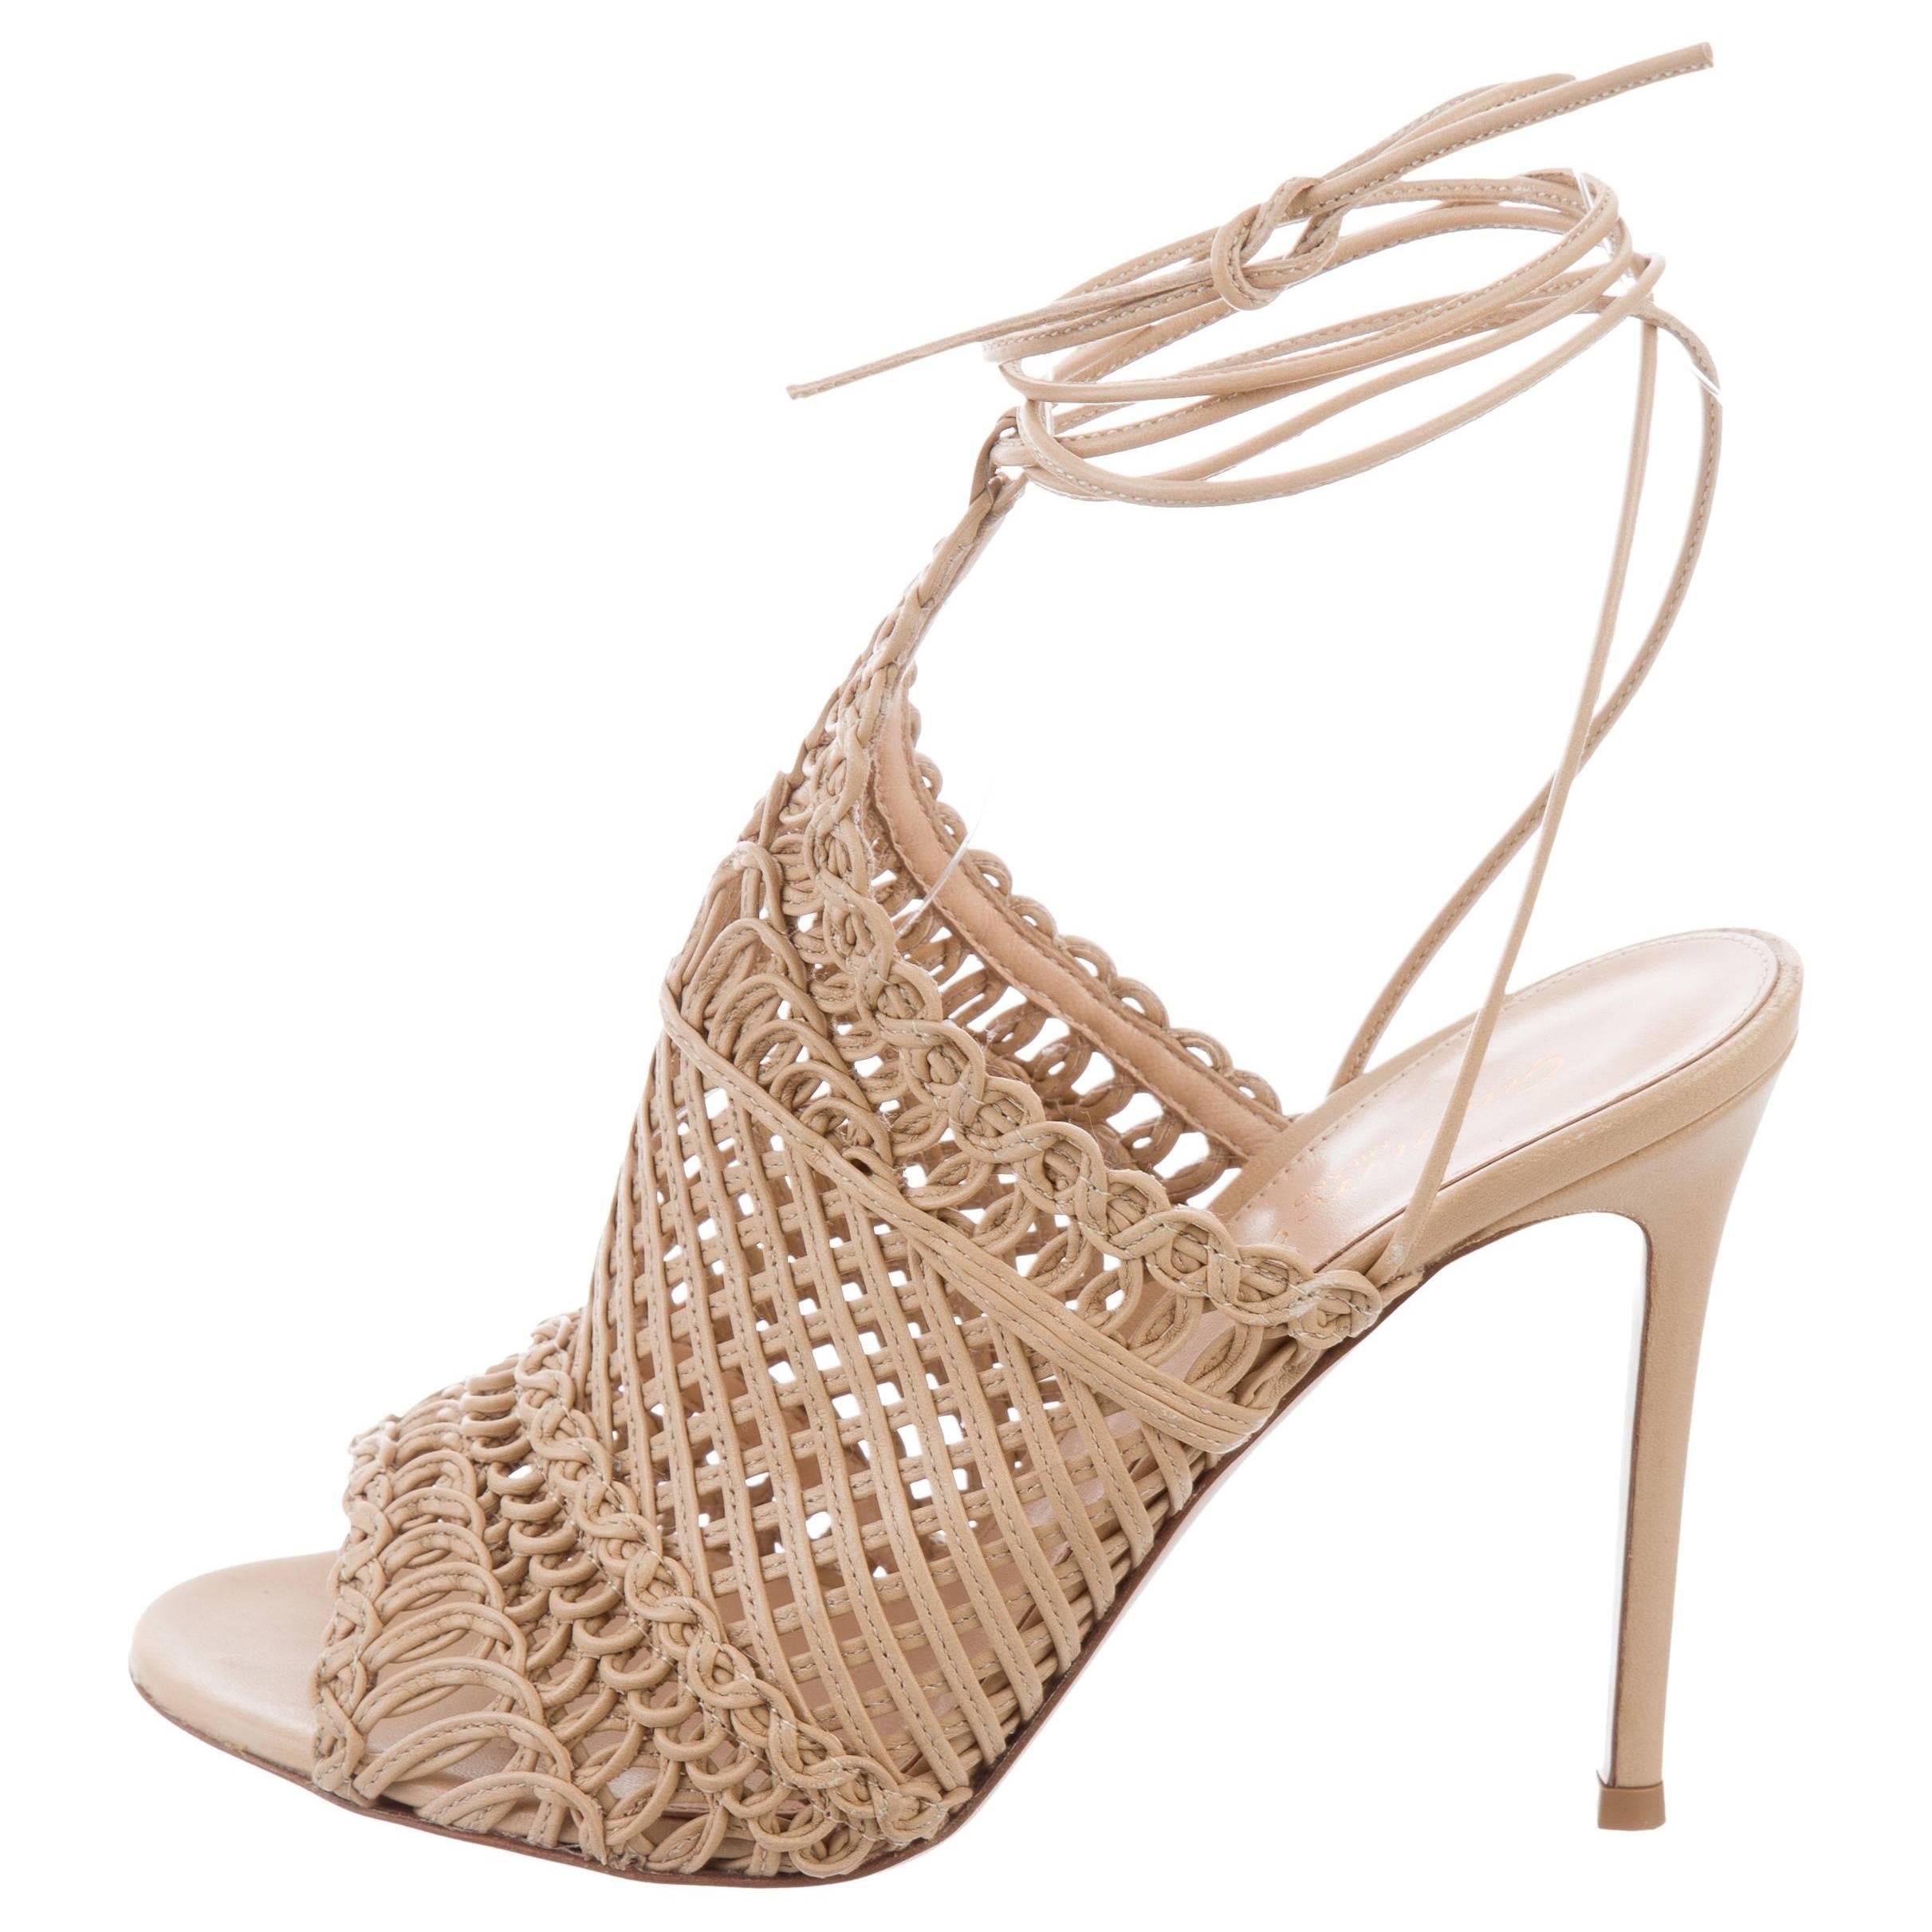 Gianvito Rossi New Tan Leather BasketWeave Evening Sandals Heels in Box